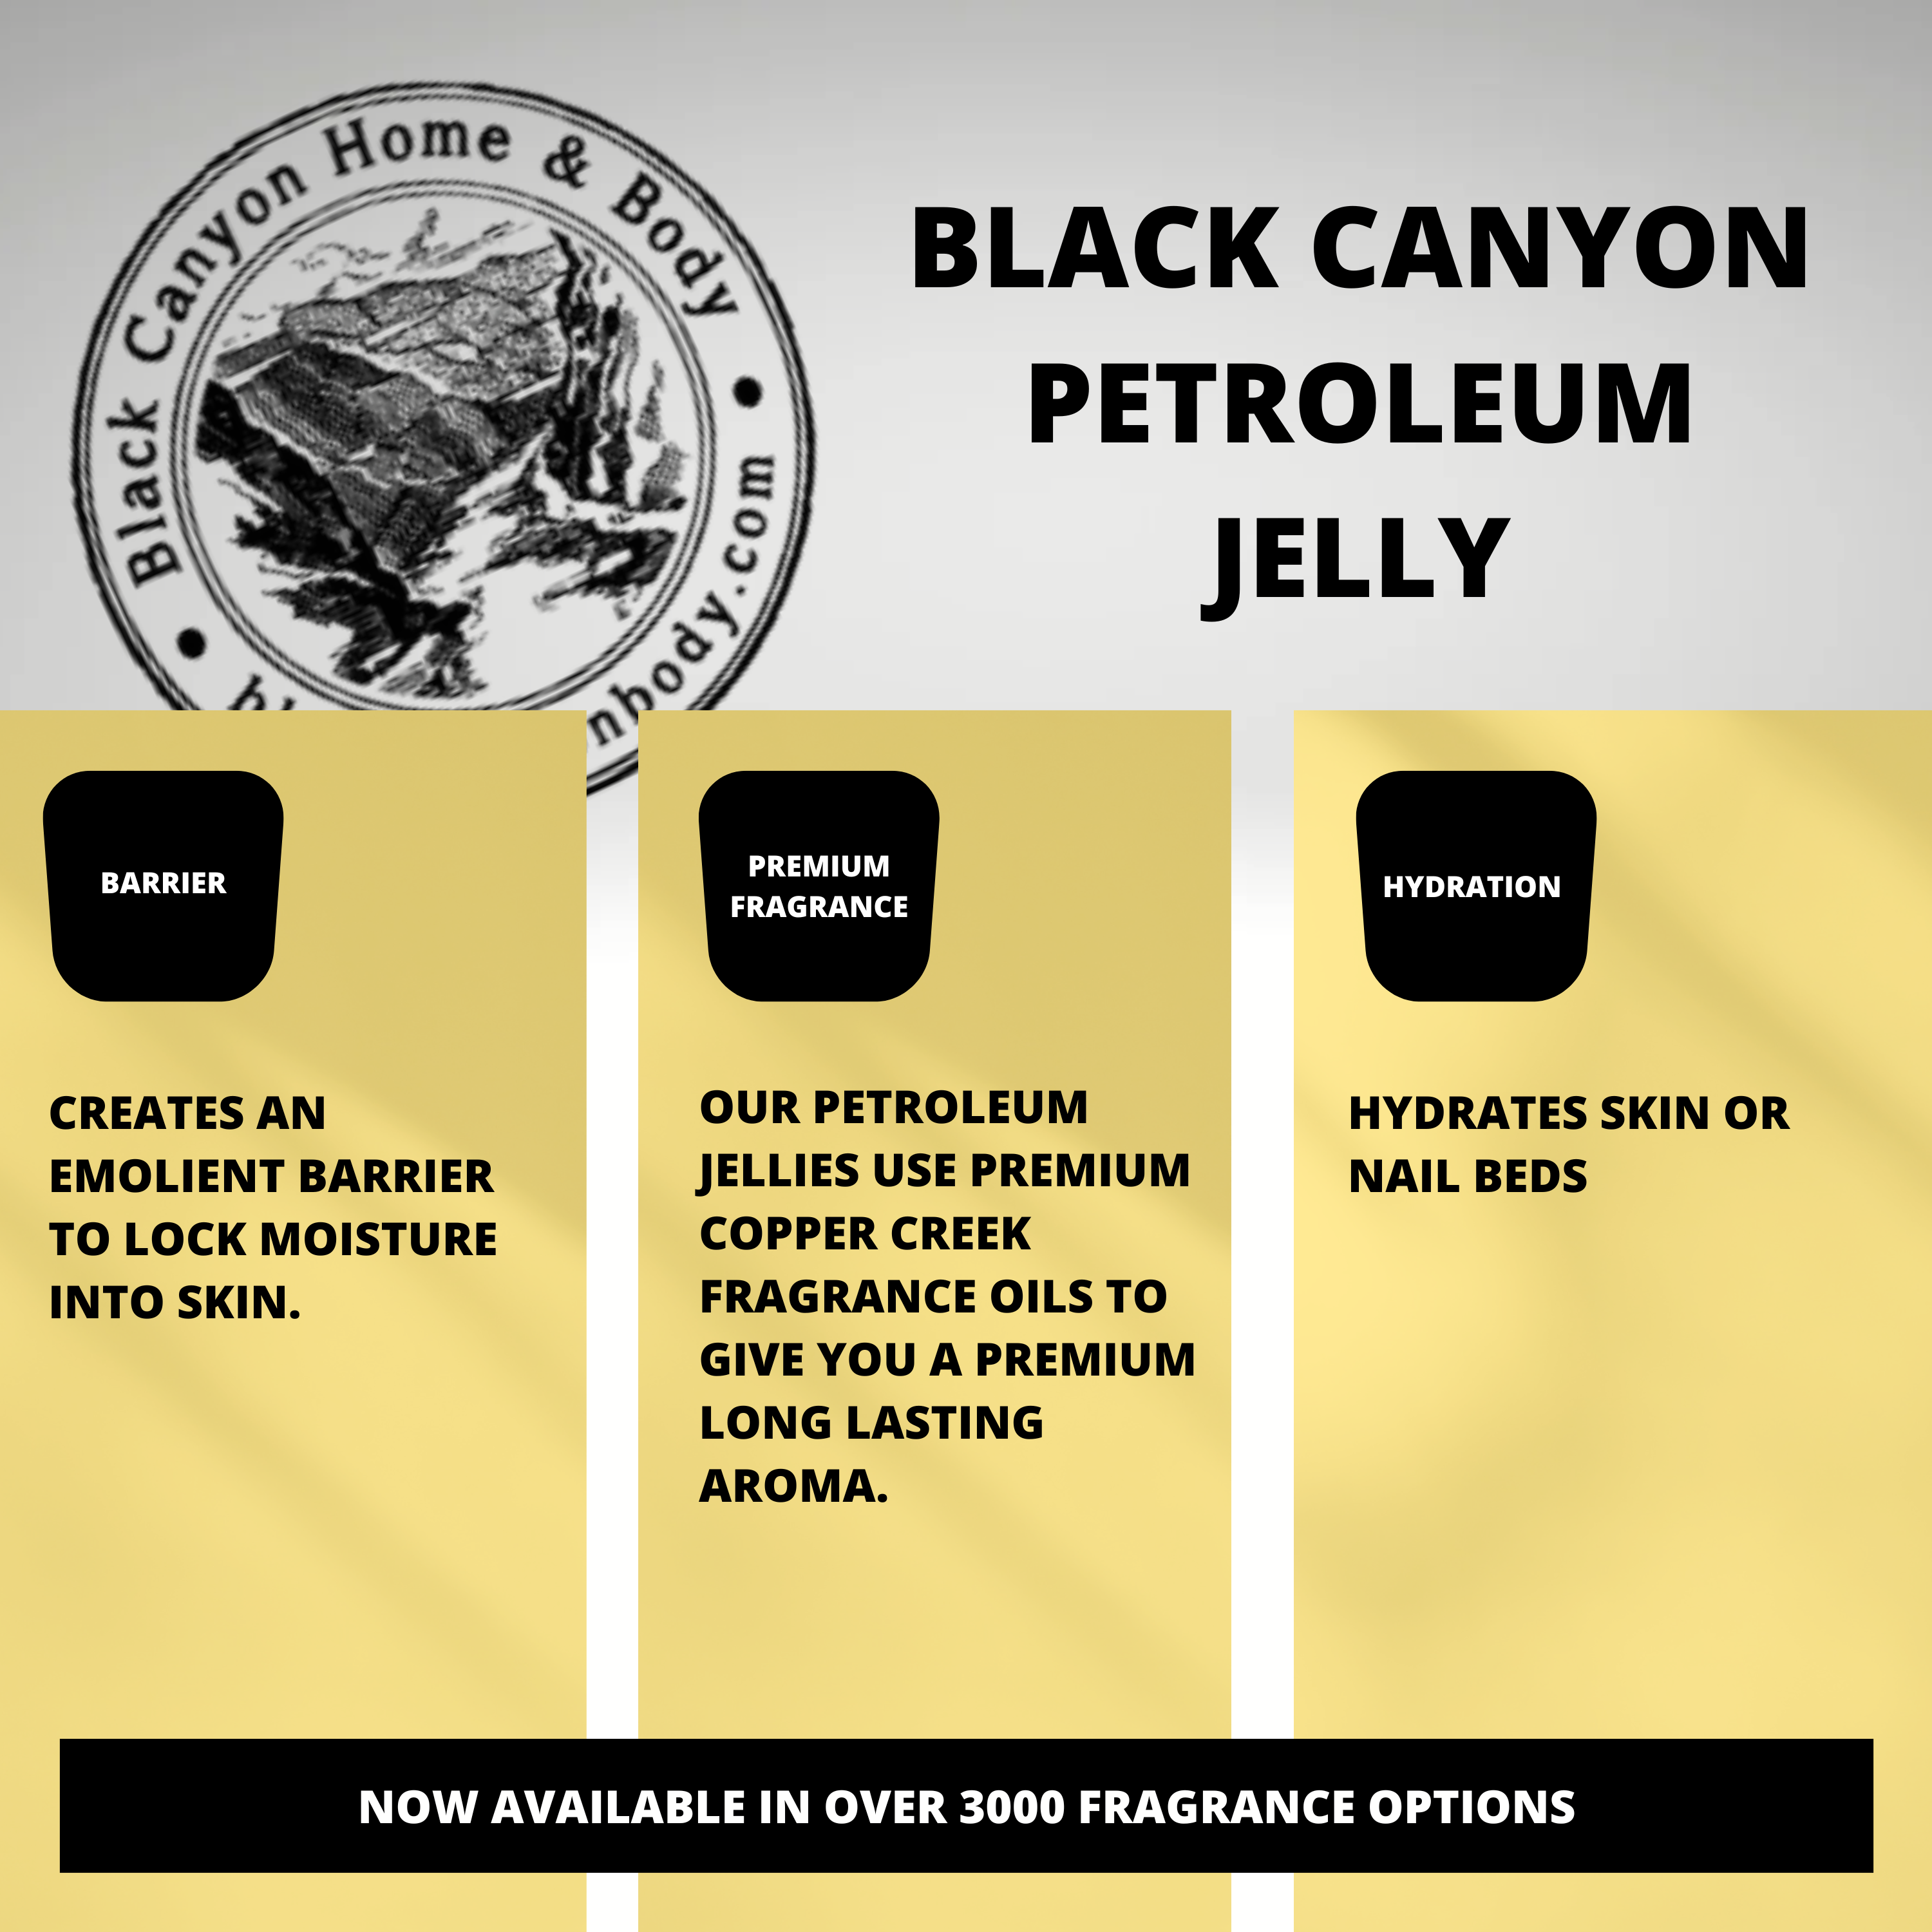 Black Canyon Agave Peach Scented Petroleum Jelly